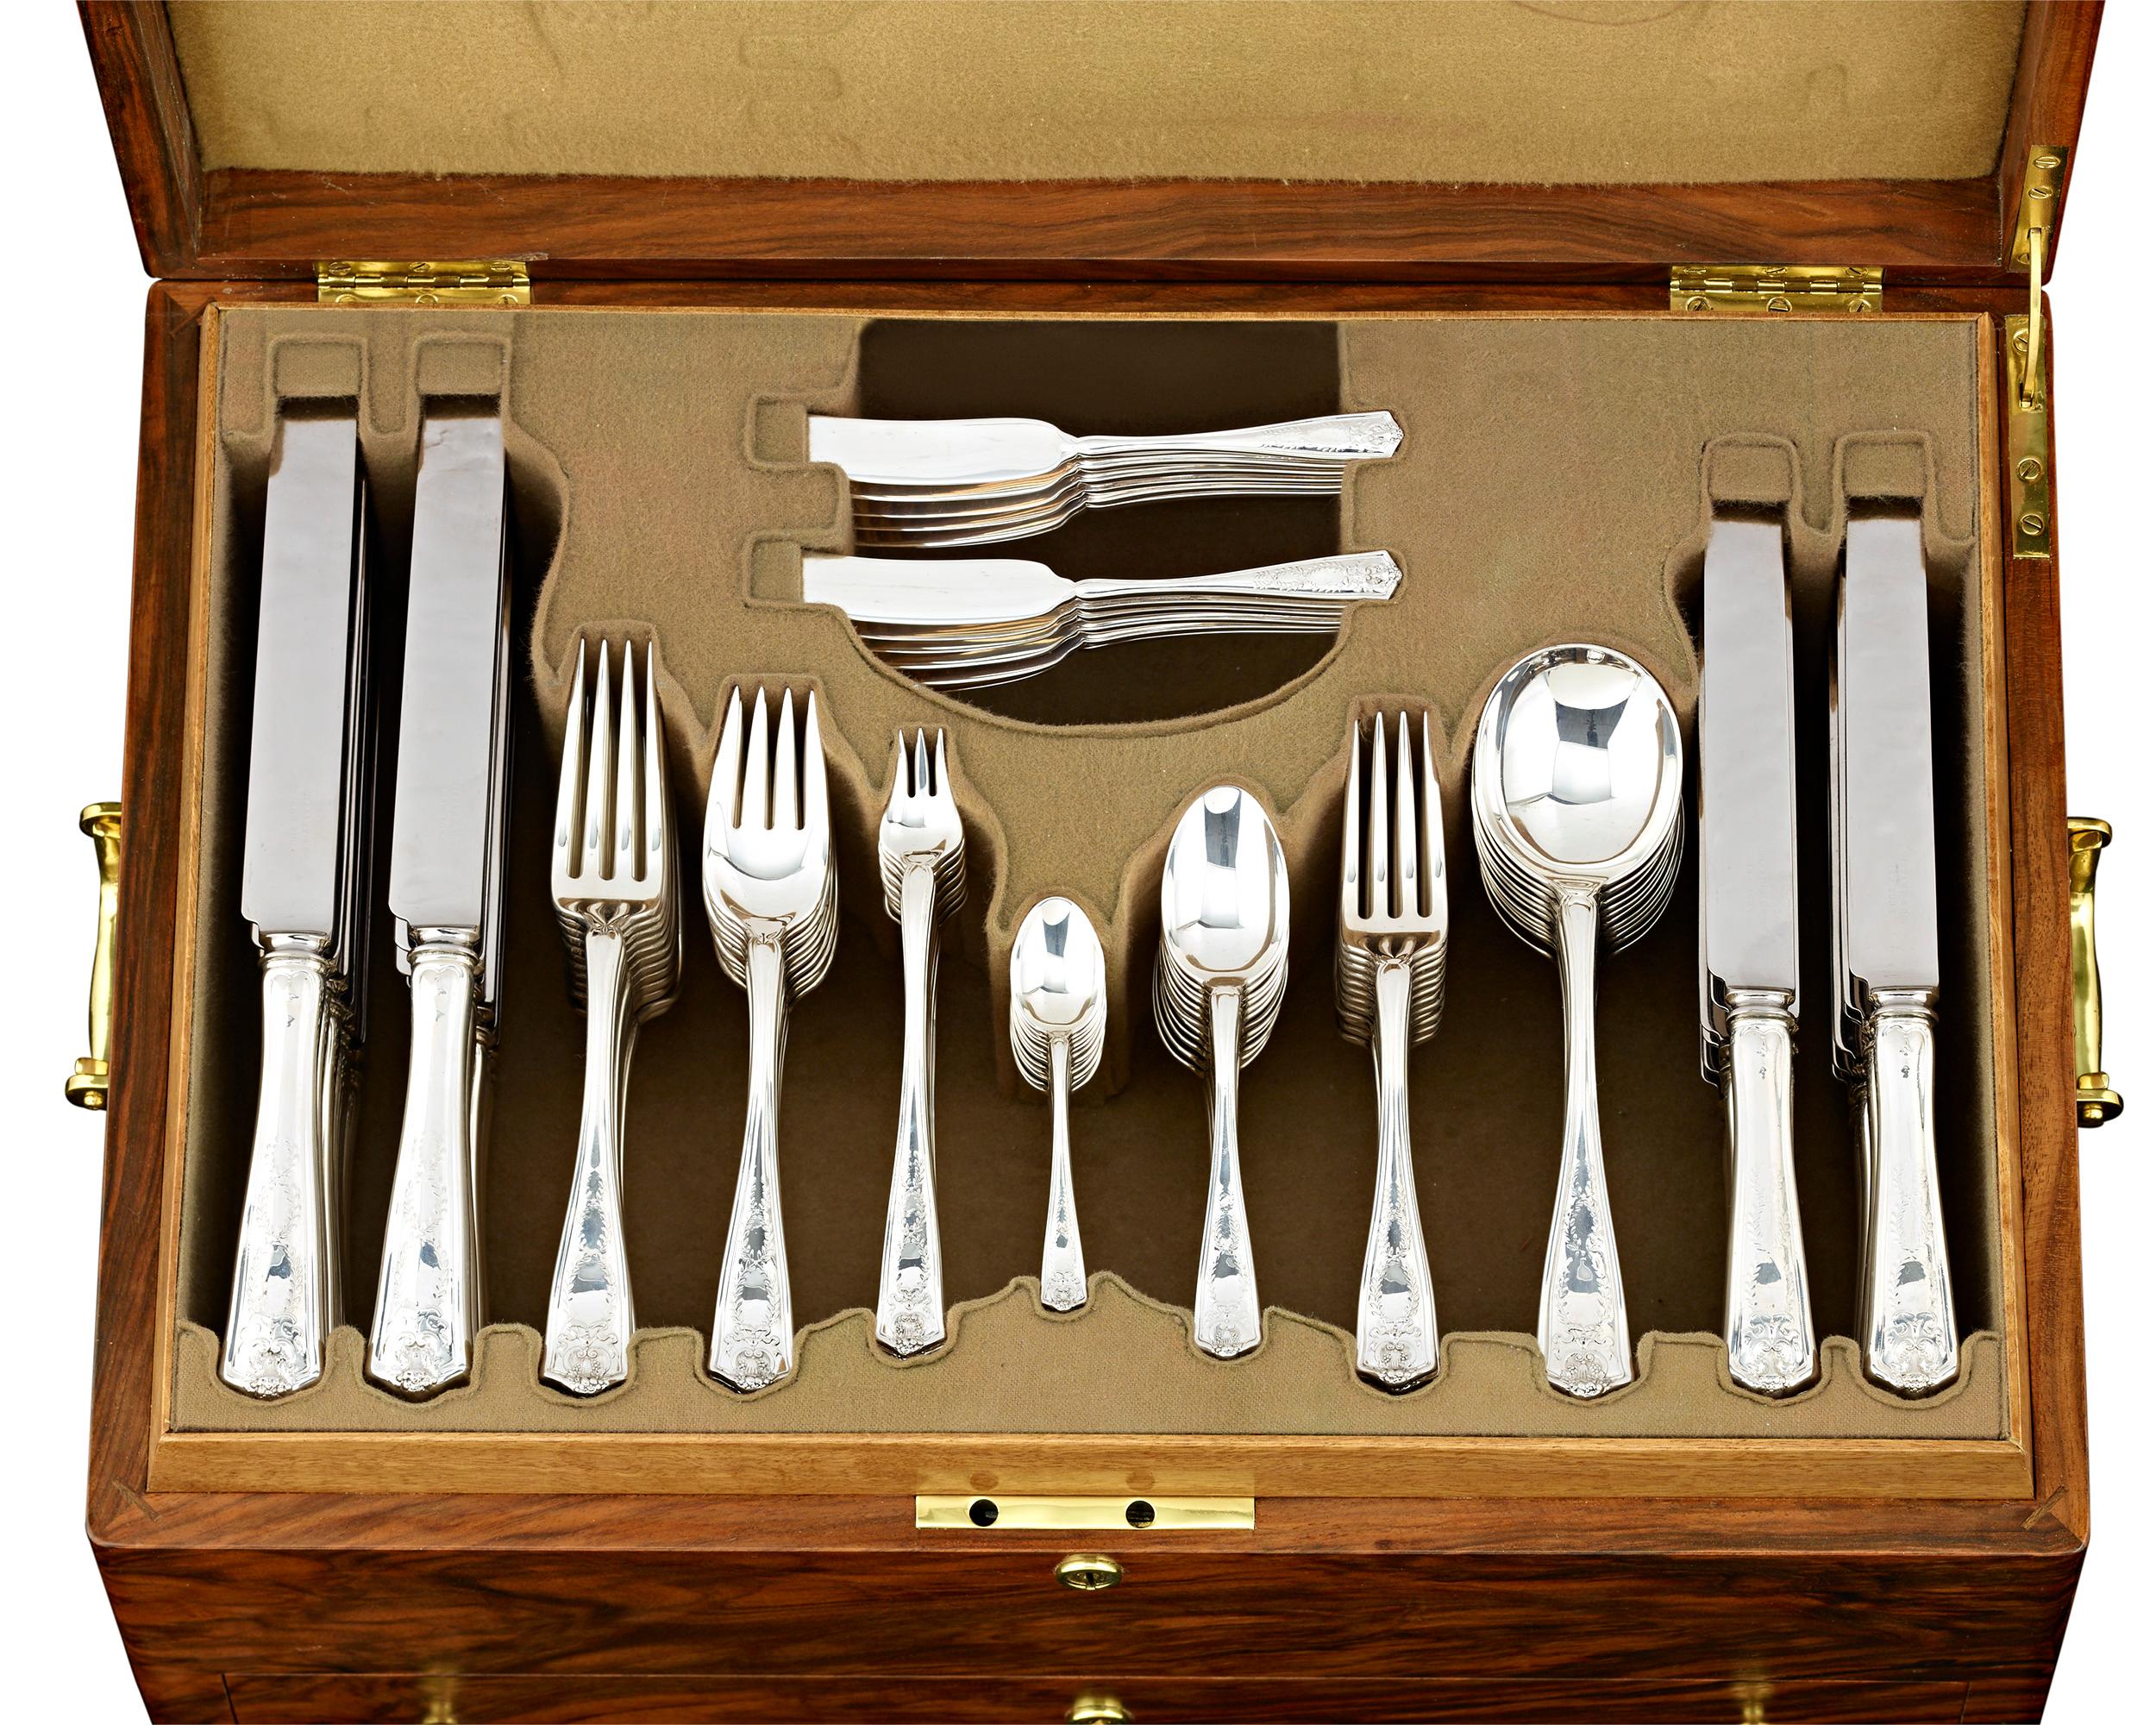 This magnificent silver flatware service for 12 by Tiffany & Co. displays the enchanting Winthrop pattern. Introduced by Tiffany & Co. in 1909, Winthrop is beautifully styled and remains one of the company’s most celebrated motifs. Incorporating